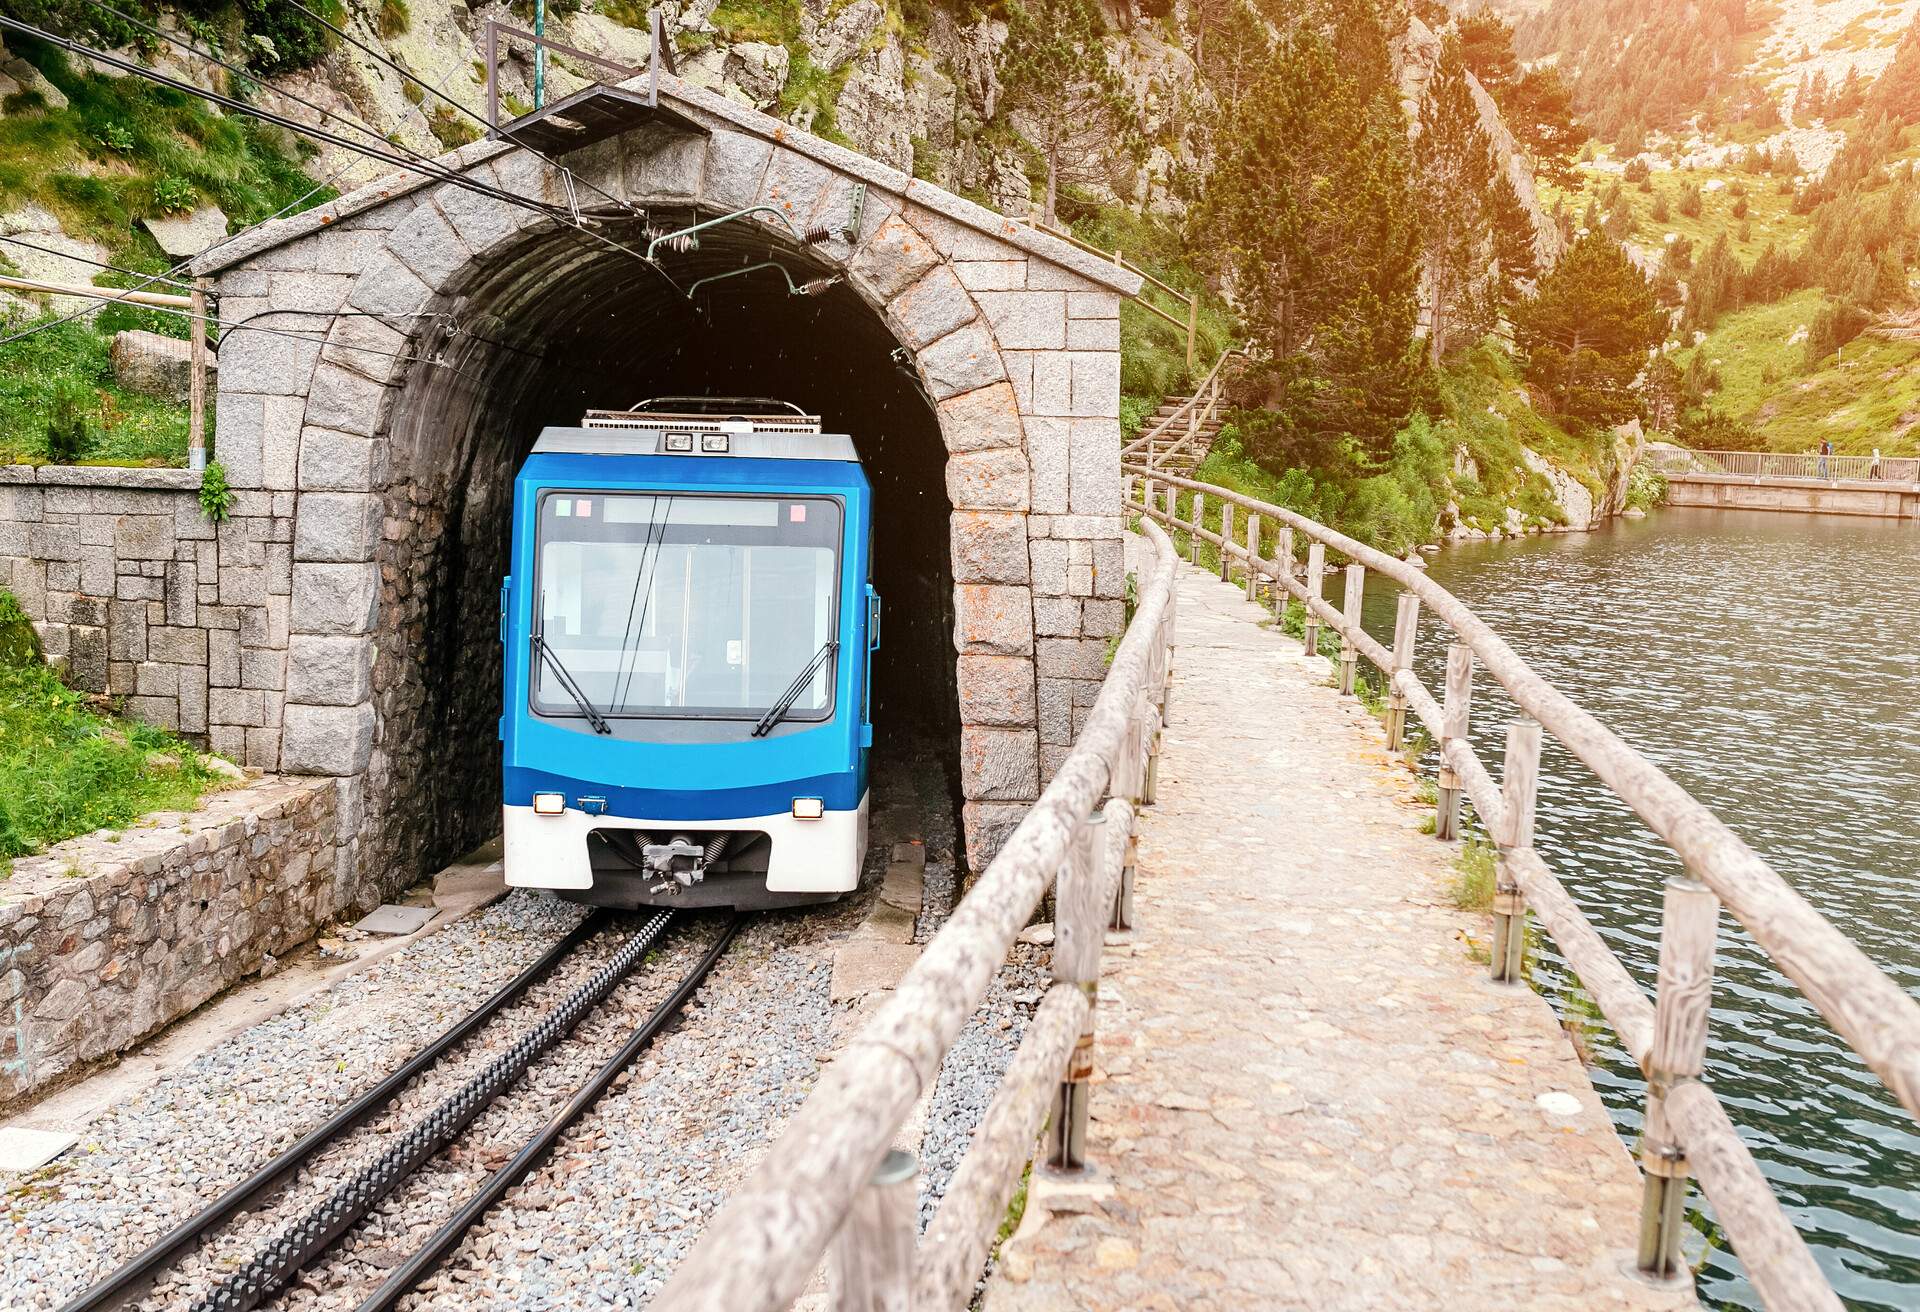 The train leaves the tunnel in the mountains